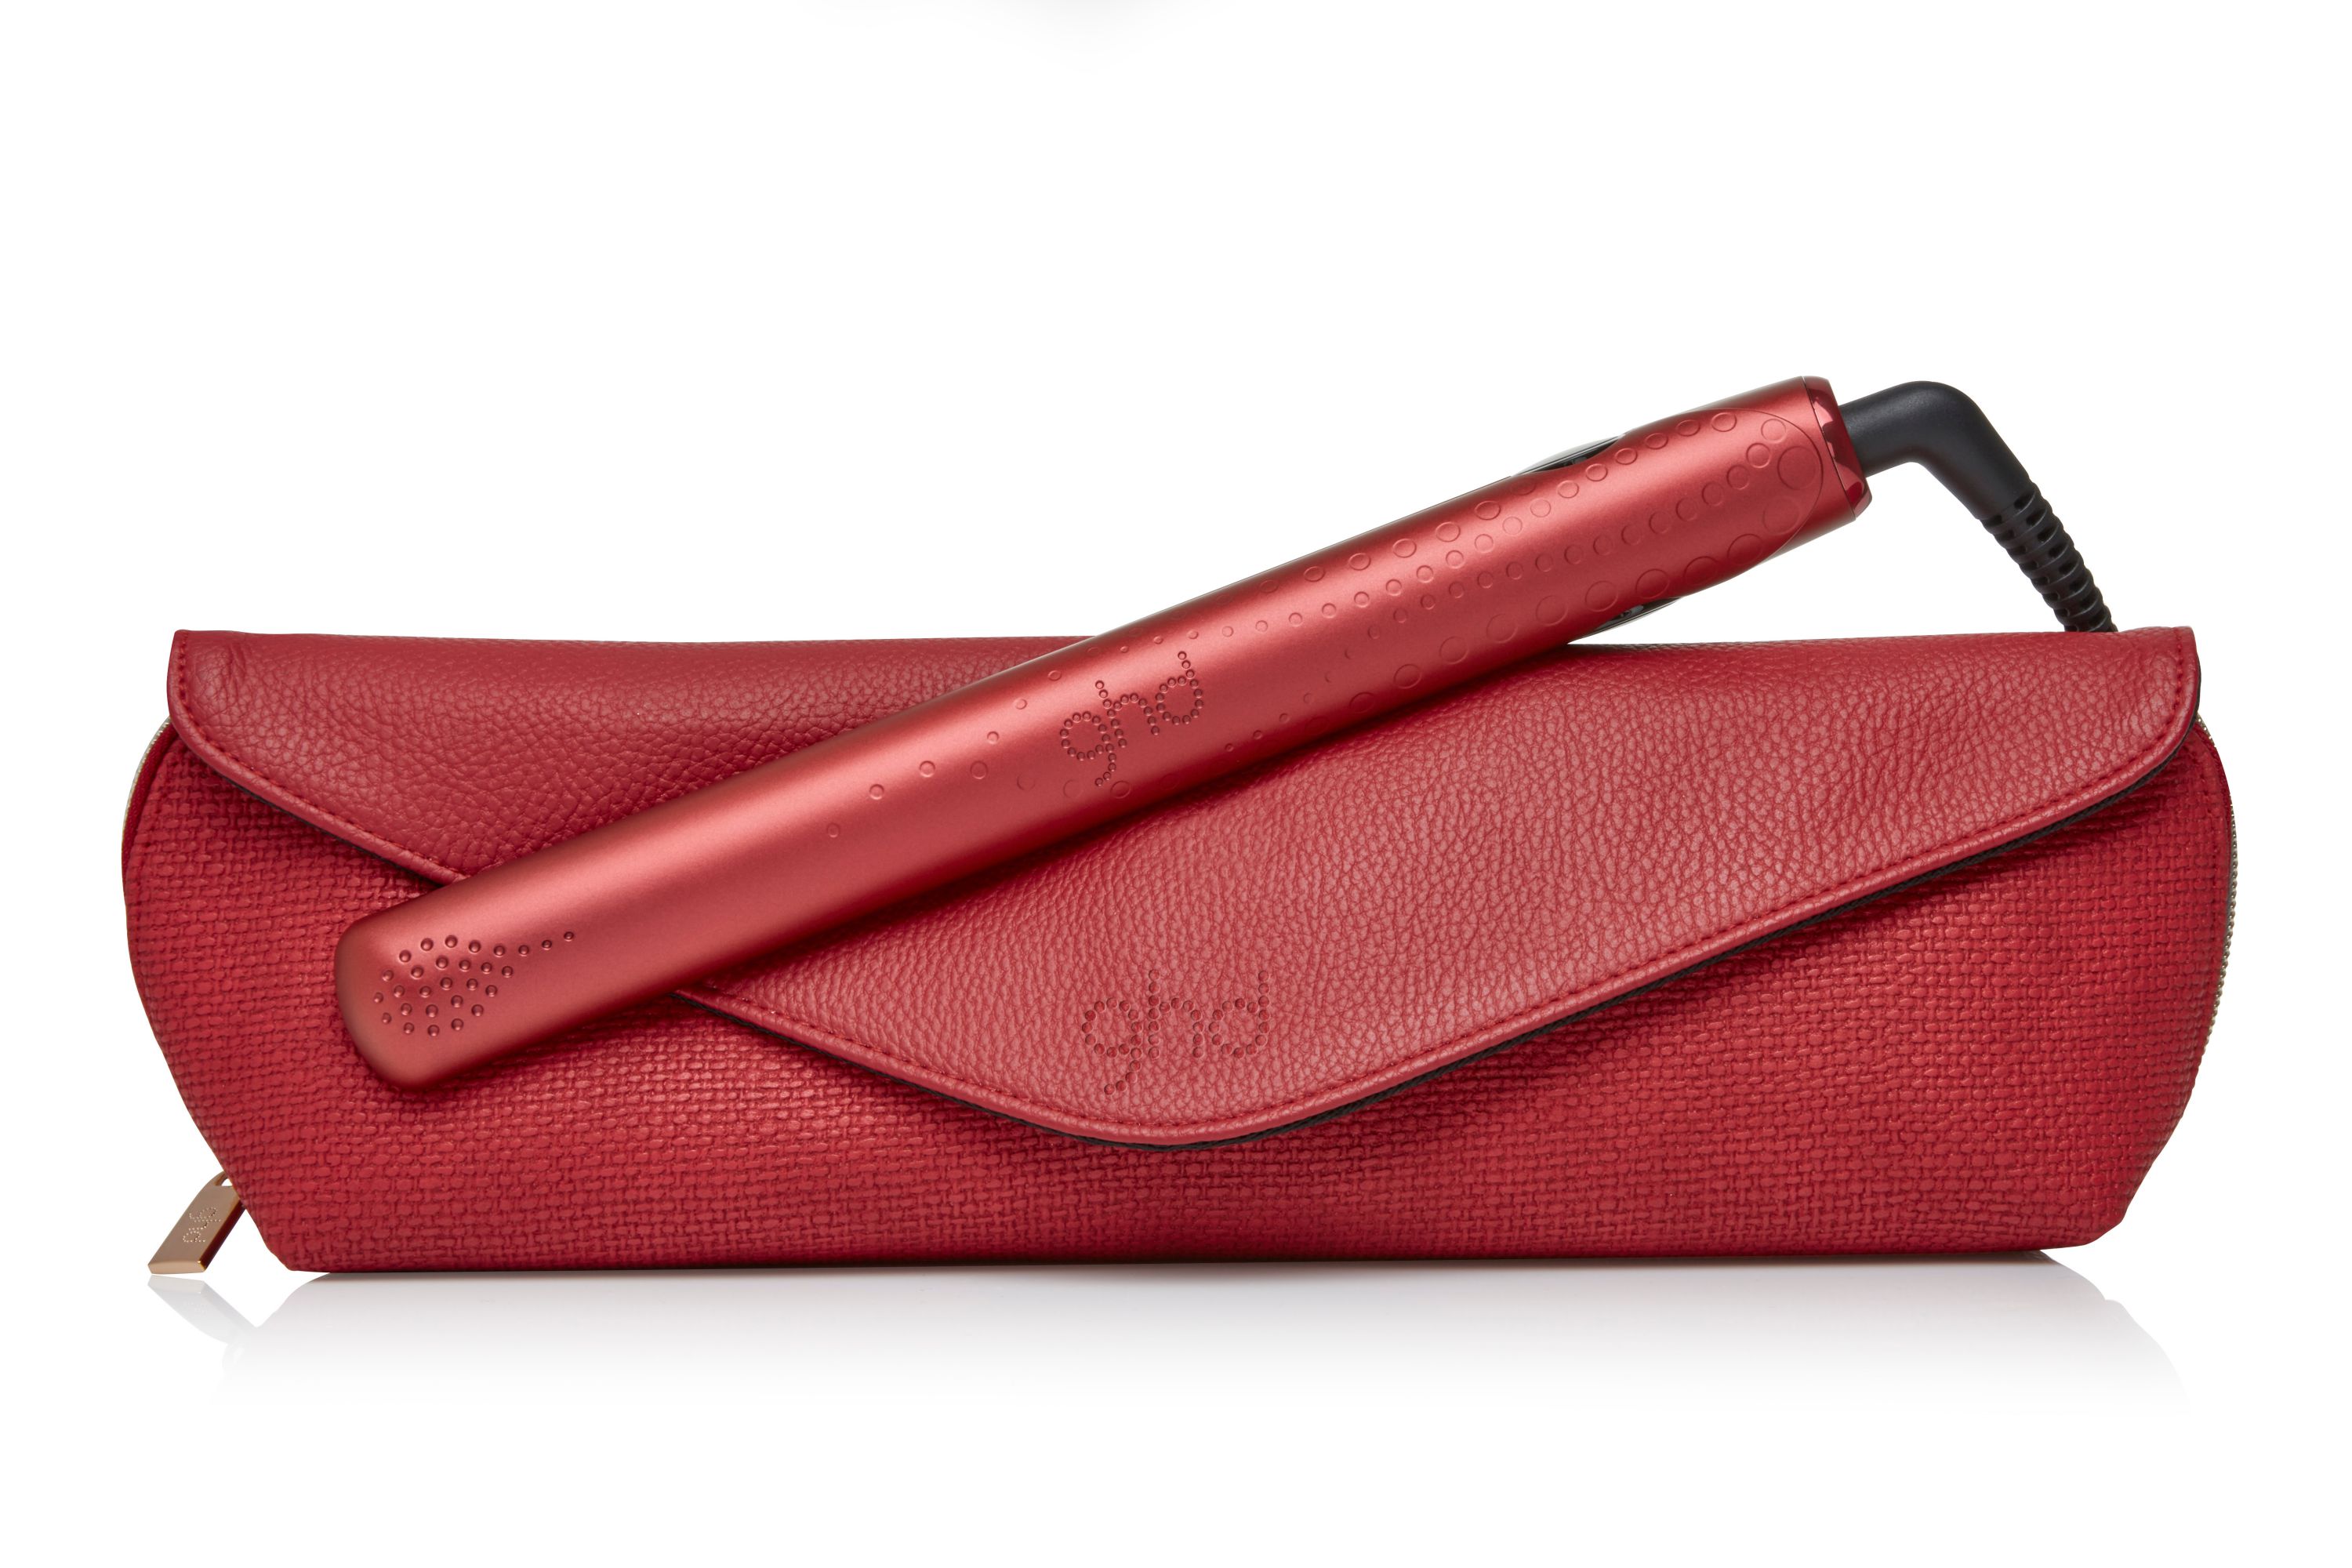 GHD’s limited-edition Wanderlust collection is a sun-drenched dream